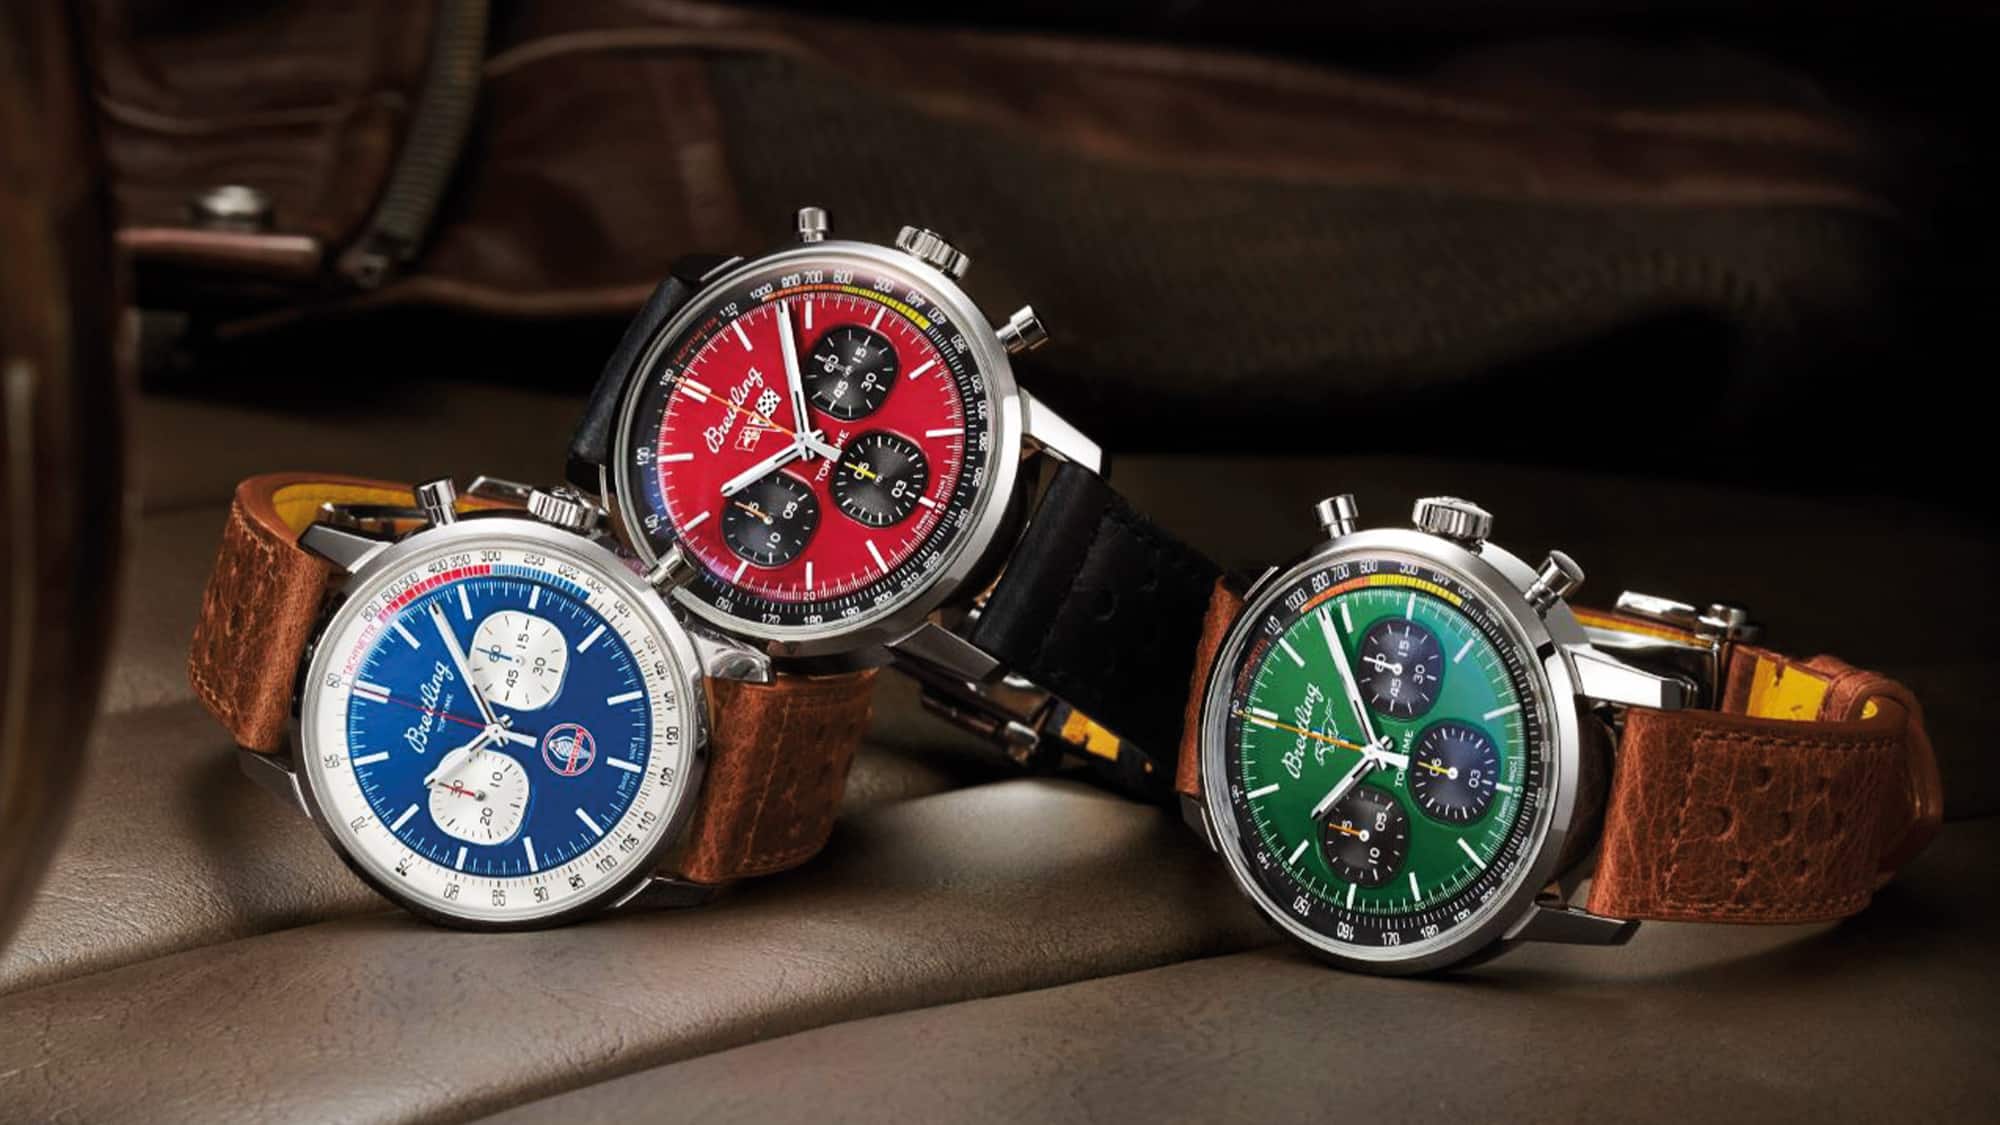 10 High-Octane, Racing and Automotive-Inspired Watches | Gear Patrol